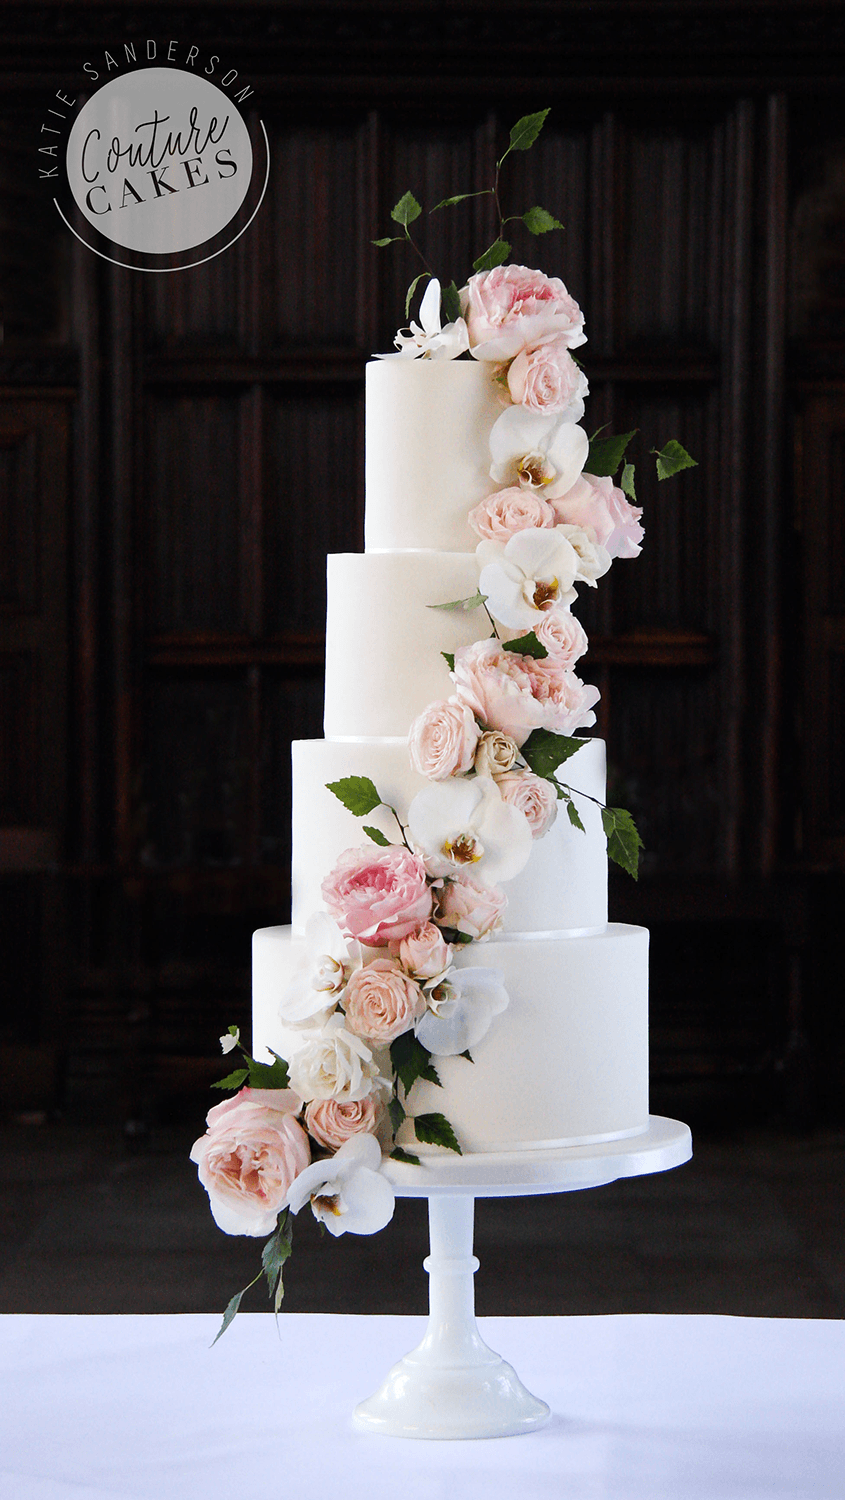 Cascading Roses & Orchids Wedding Cake: Serves 120 portions, Price cat A £490 plus £120 flowers